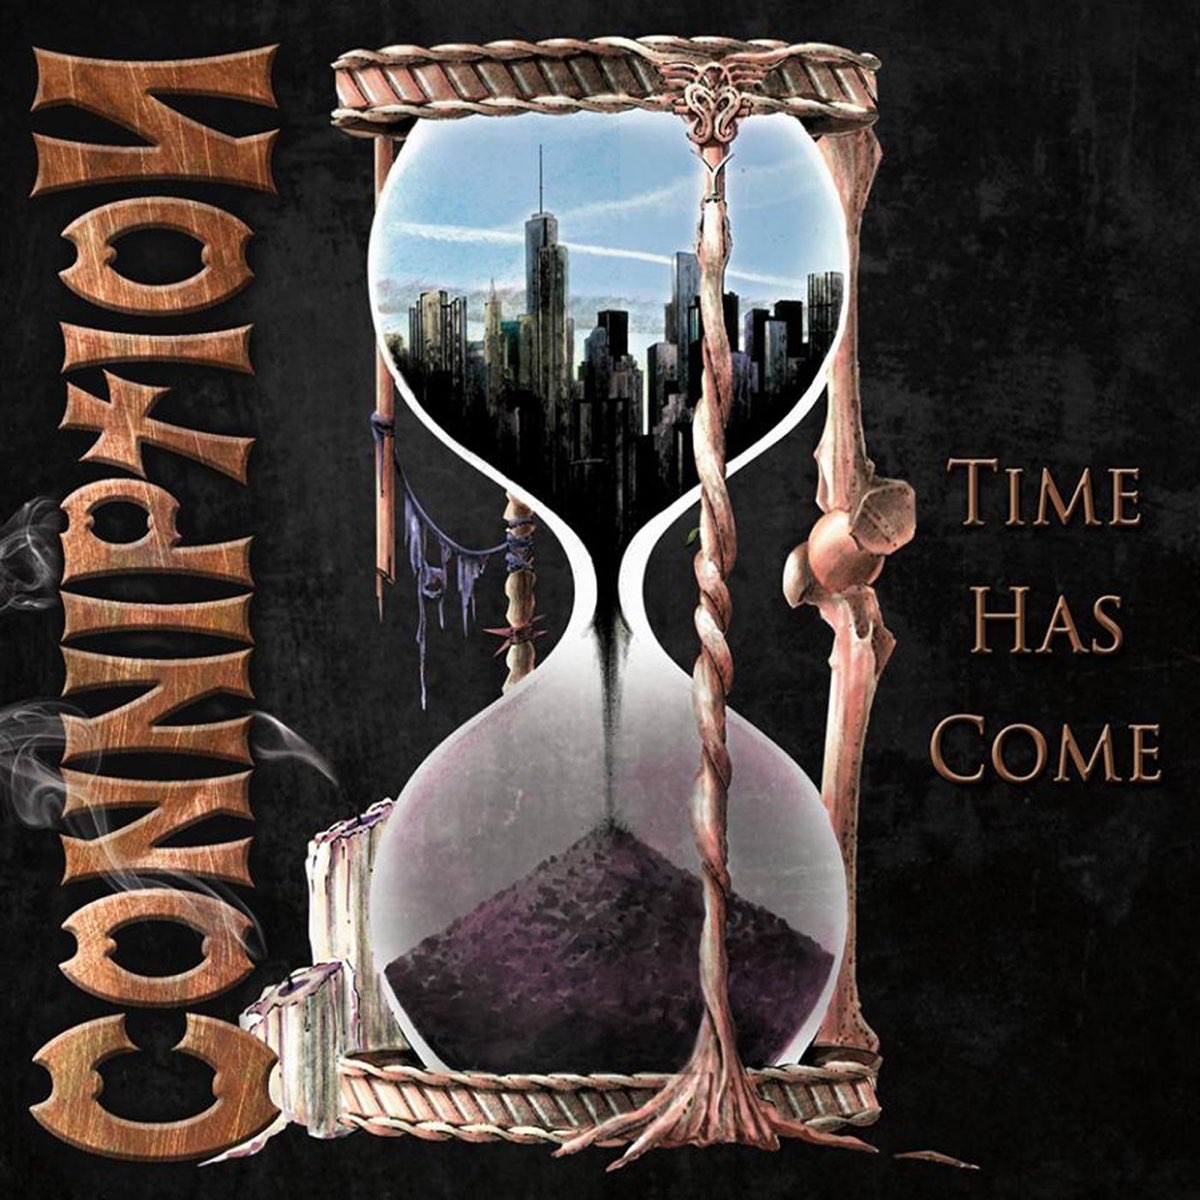 Time has. Thrice albums. The time has come. Conniptions.